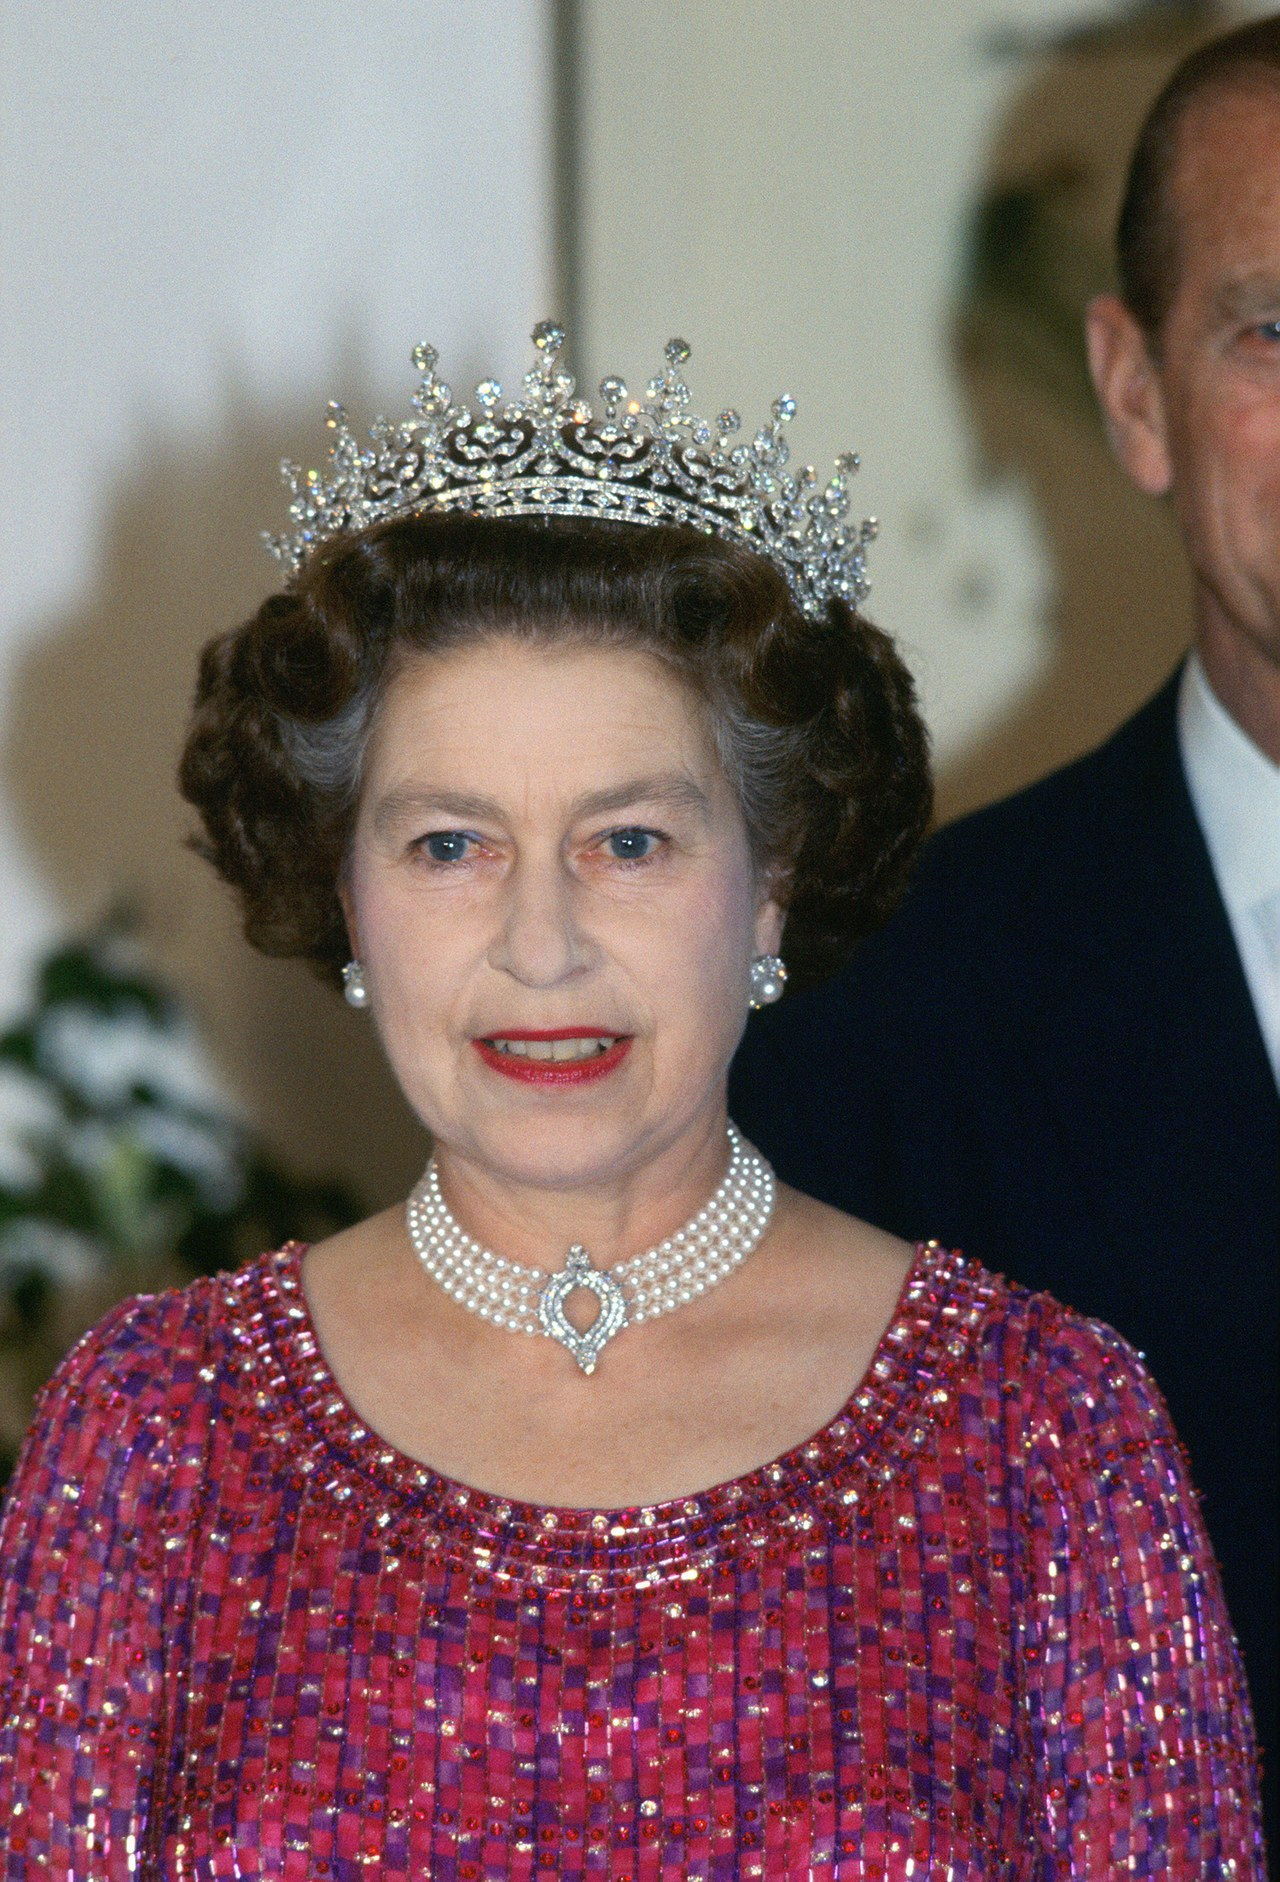 Kate Middleton Borrows Queen's Pearl Choker To Celebrate Her Majesty's 70th Wedding Anniversary